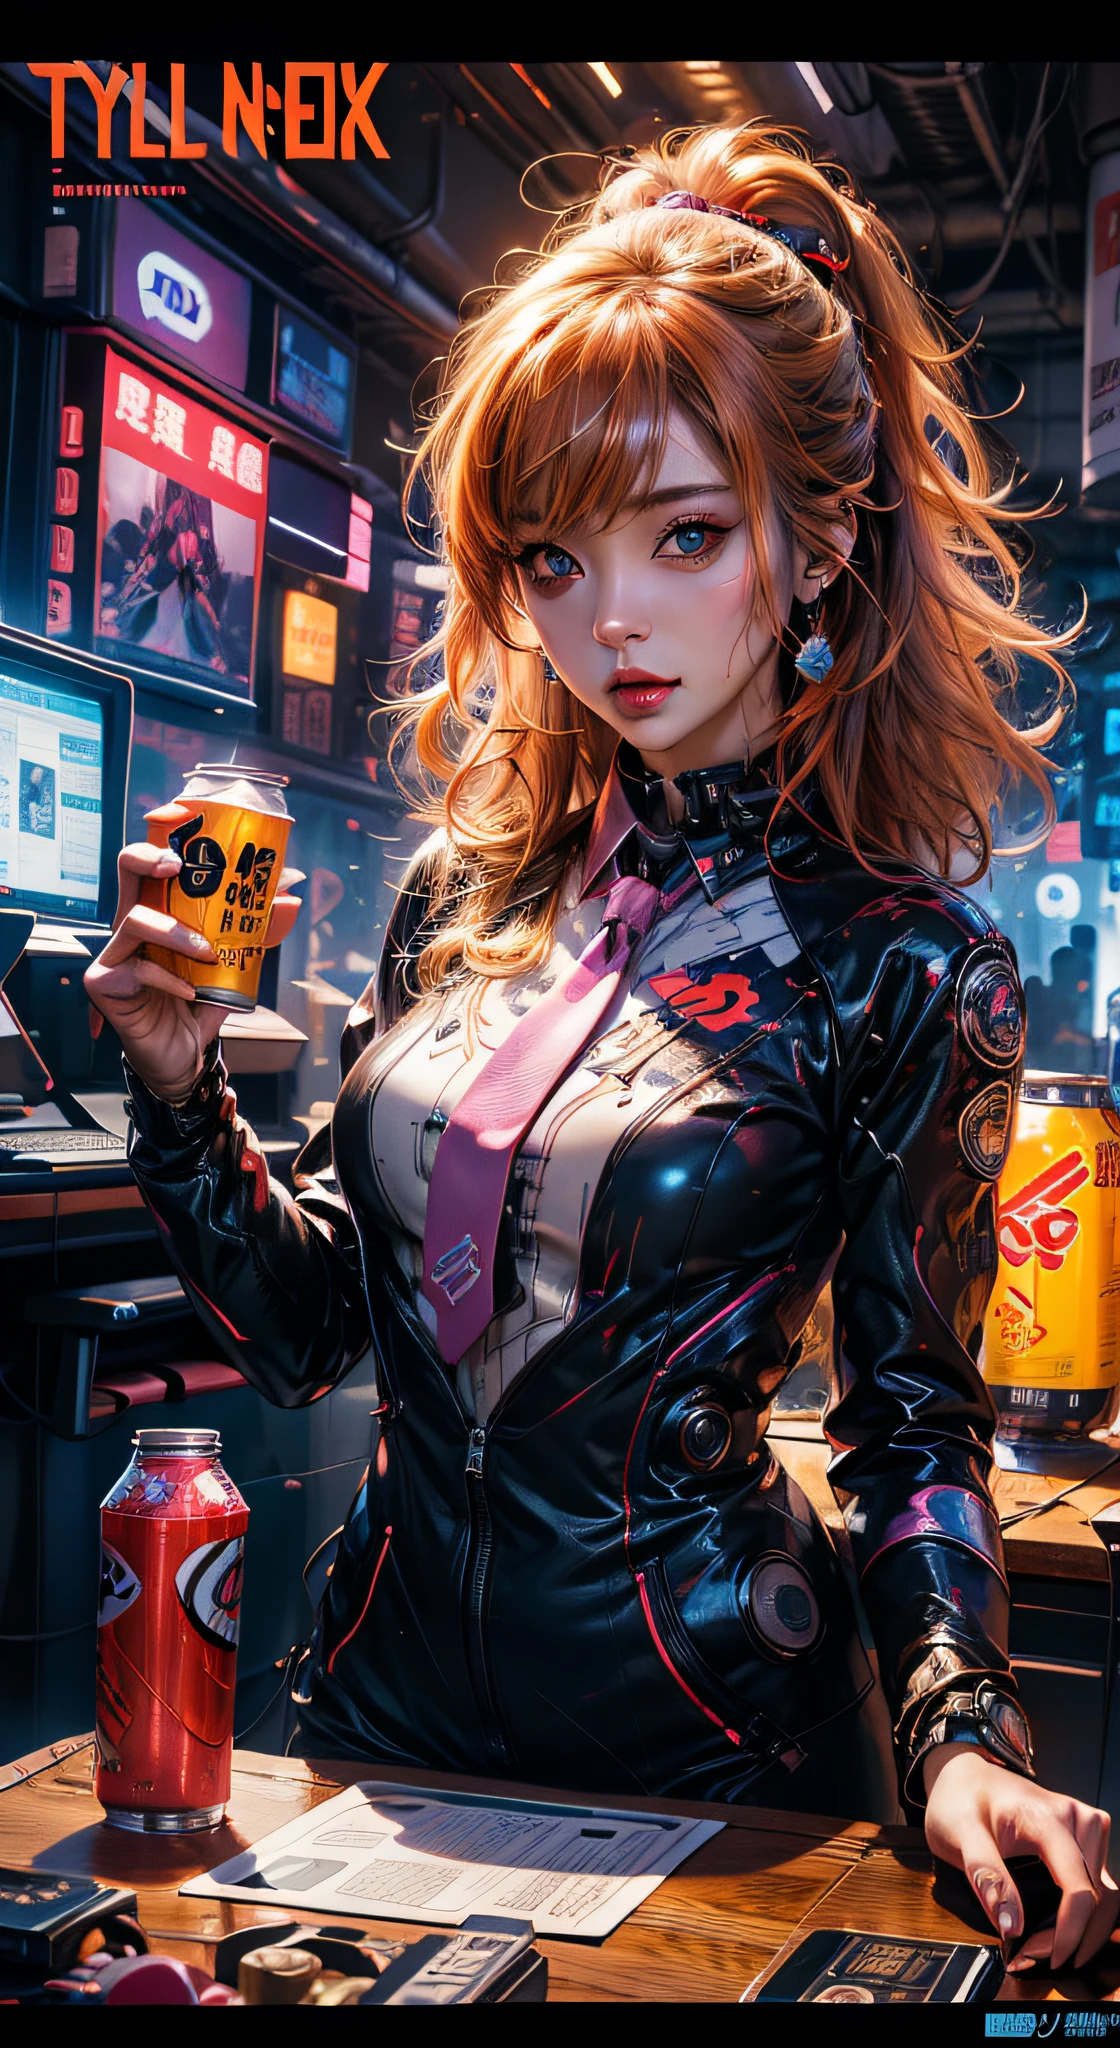 8ｋ、high-level image quality、One man、Systems Engineer、Overtime、energy drink、energy drink、Neon Street、toyko、s Office、personal computers、keyboard、Cable cyberpunk、vivd colour、Shadows are bright colors、Clear Expression、Clear eyes and nose、office worker、office worker、Near future、Surrounded by liquid crystals、toil、Neck tie、jaket、Clear contour lines、8K、Clear facial parts、face clearly visible、Employee ID around the neck、Anime touch、Comic style、the number、Electromechanical、Acrobatic system、Movie poster style、vivd colour、Popular design、Merchant、Shadows are bright colors、energy drink、Canned energy drinks are scattered all over the place、Place the capsule form of the drug on the tongue、Capsule-like drugs are scattered、trippy colors、psychopath、The halo points to、God、Deities々right、The entire screen is vividly colored、Clown makeup